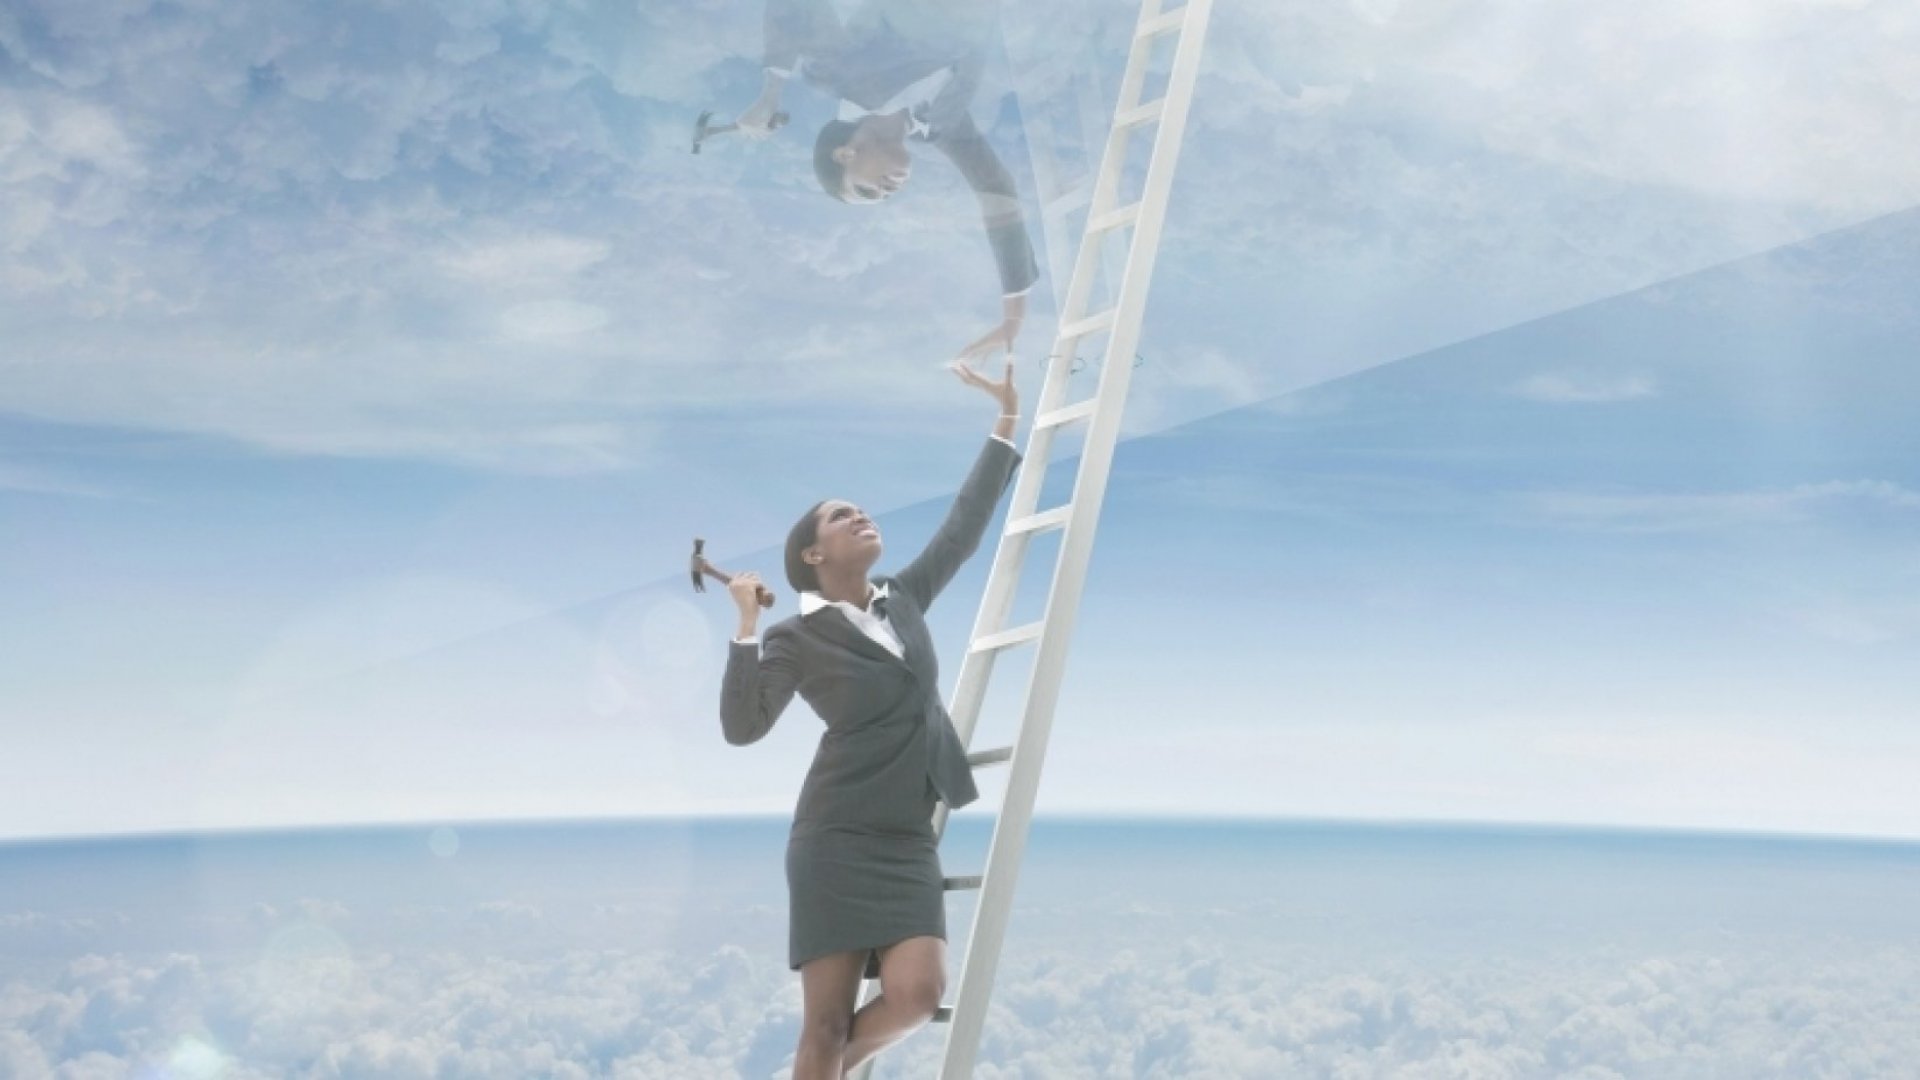 A woman stands on a ladder above the clouds, with a hammer in her hand poised to shatter the glass ceiling above her.